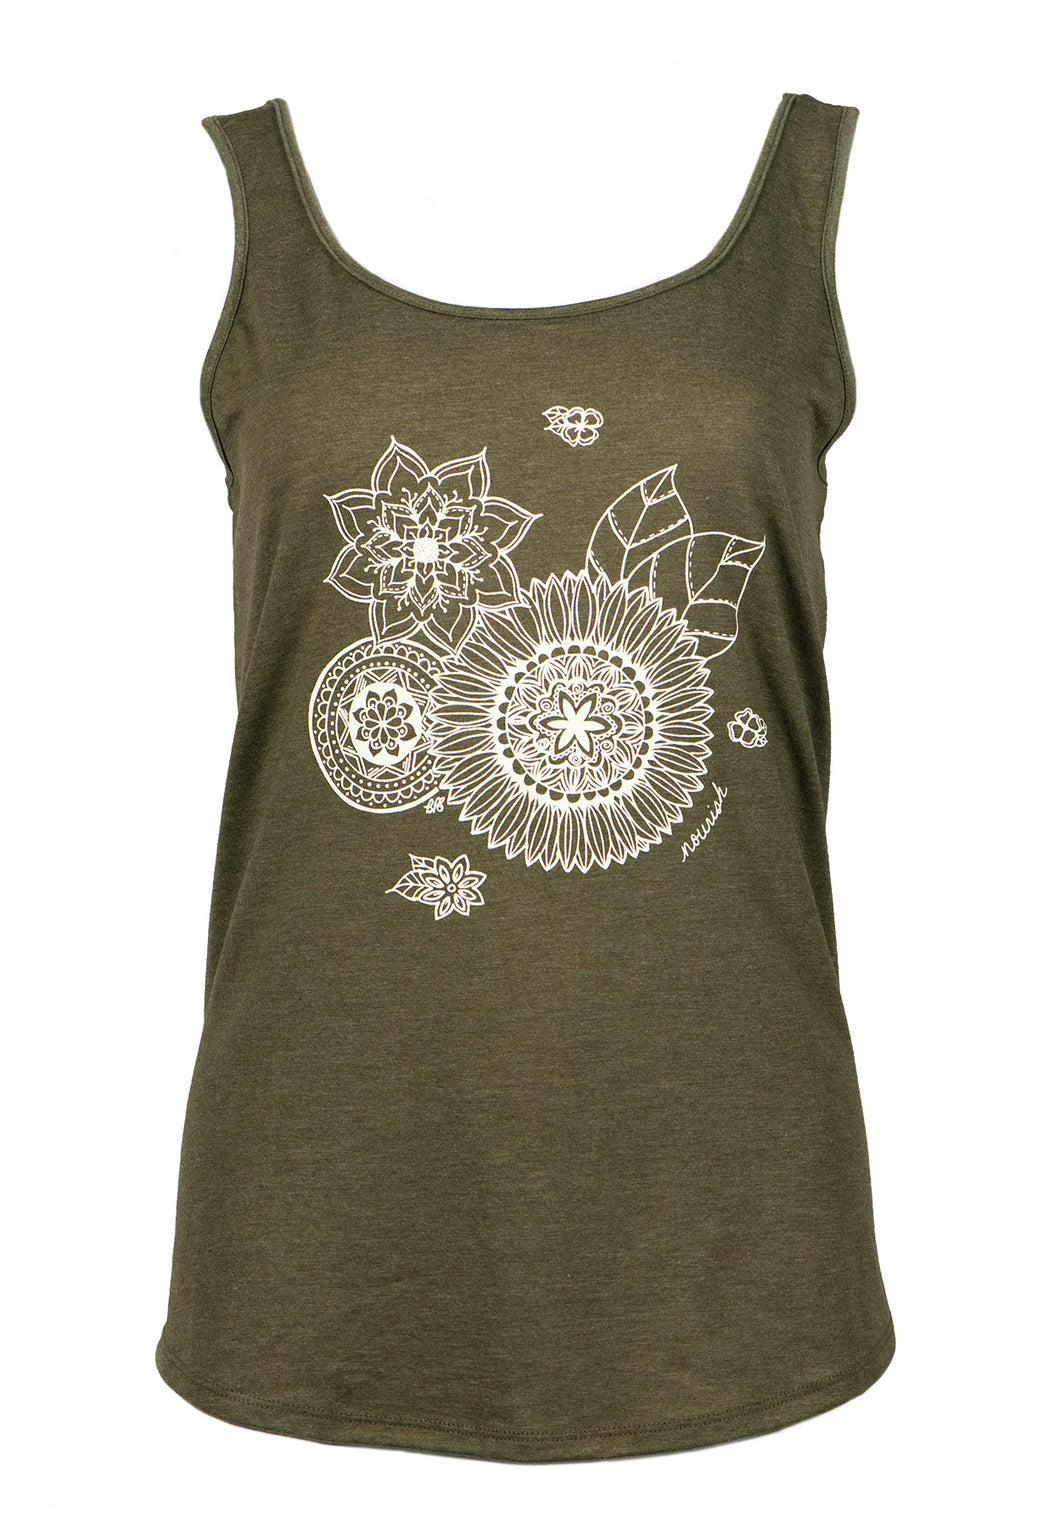 Front view of the Women's Relaxed Sage Green Tank with hand drawn mandala